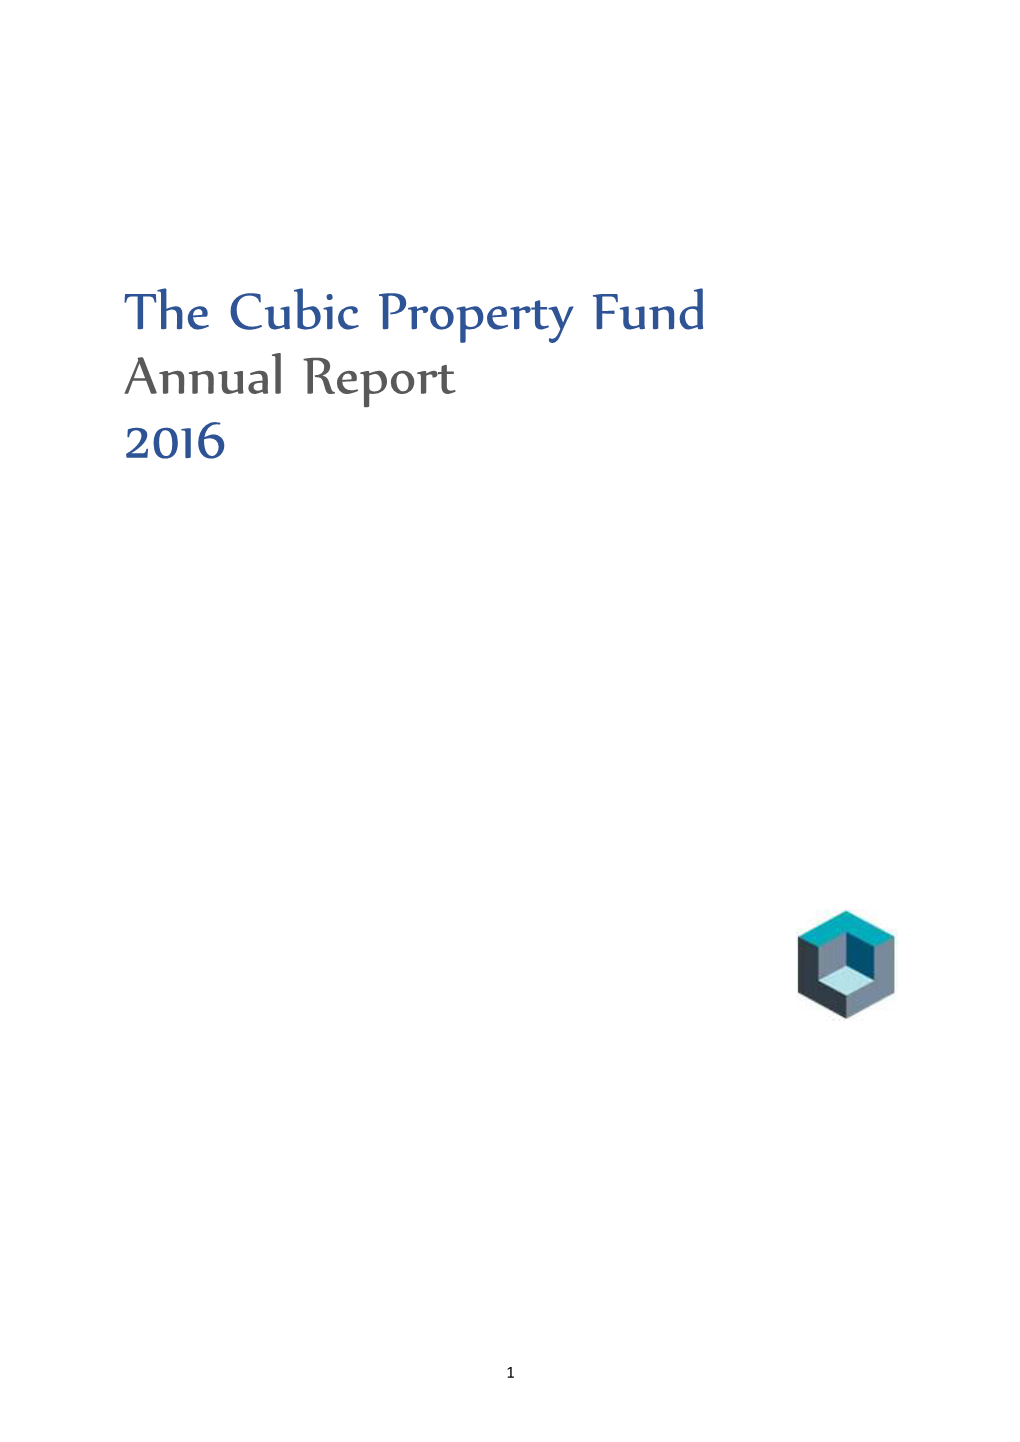 The Cubic Property Fund Annual Report 2016